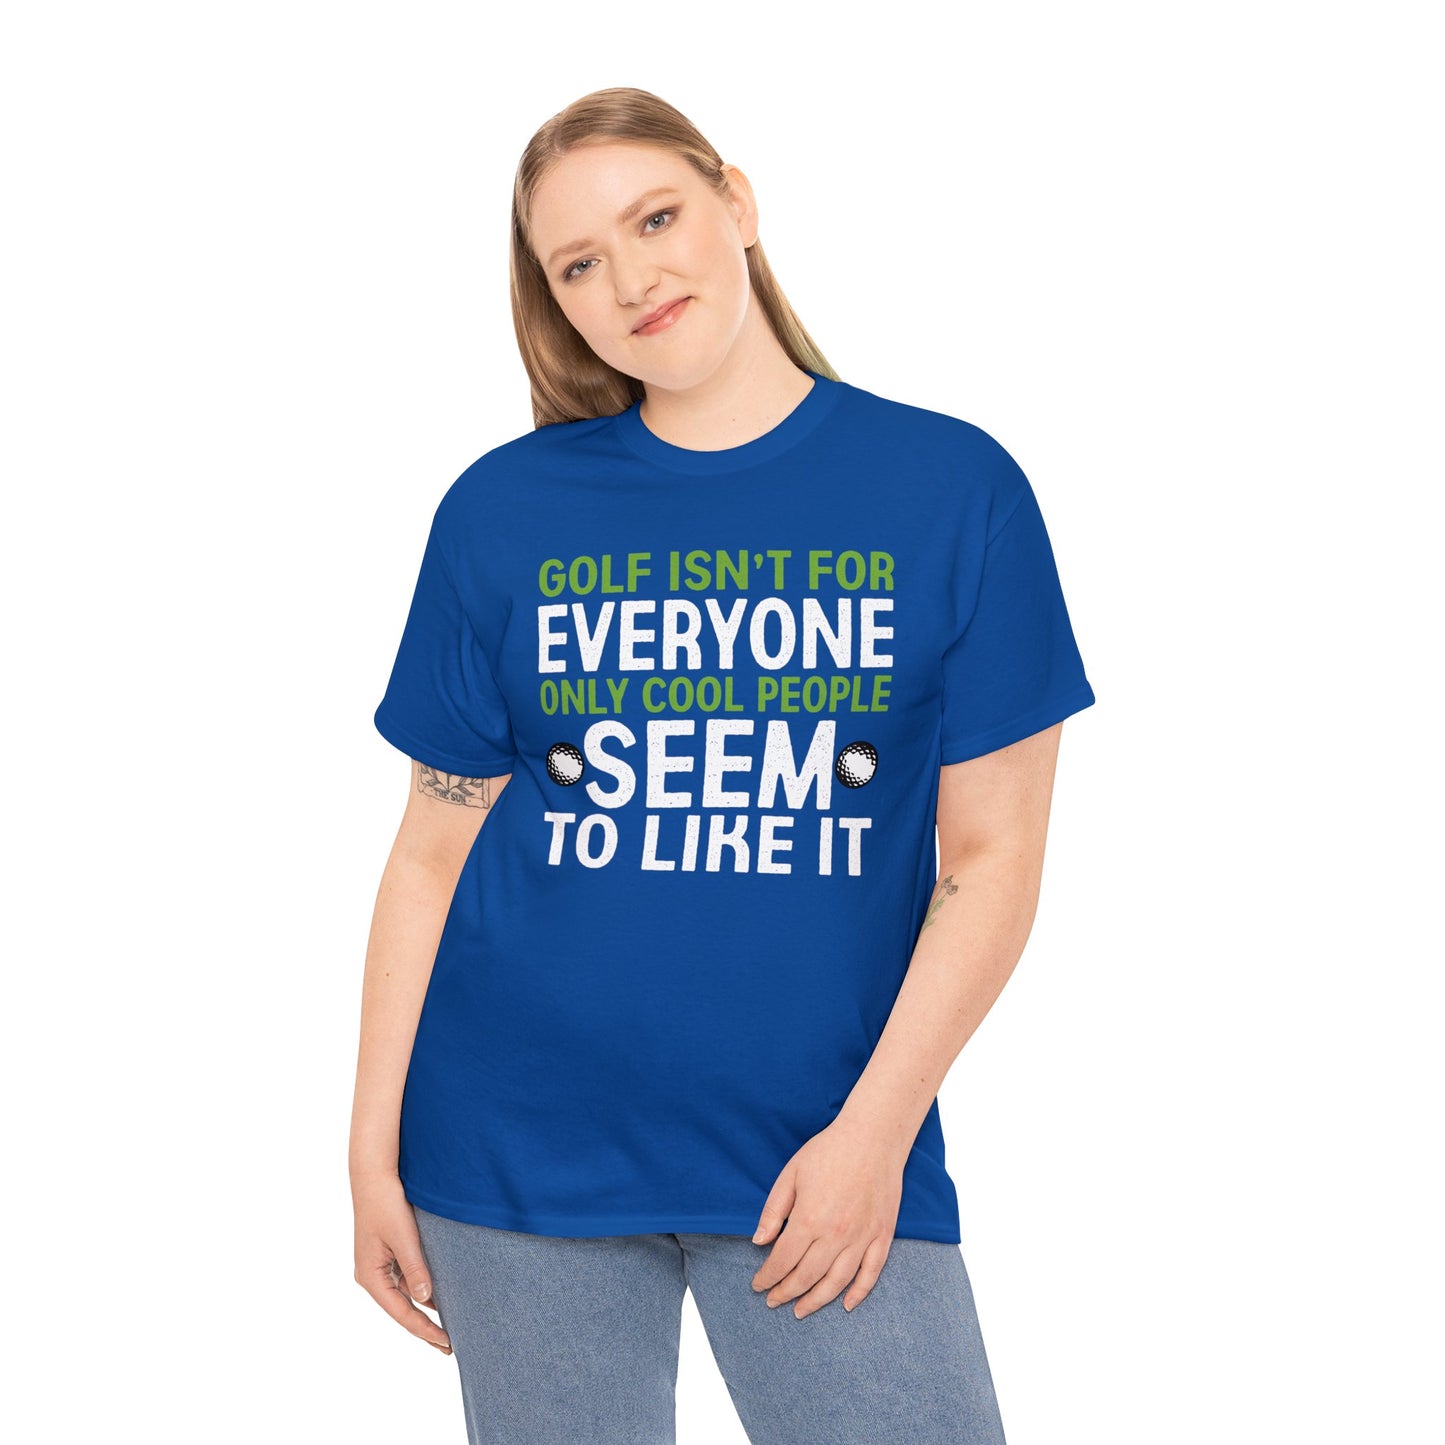 Unique 'Golf Is Not for Everyone, Only Cool People SEEM To Like It' Shirt!